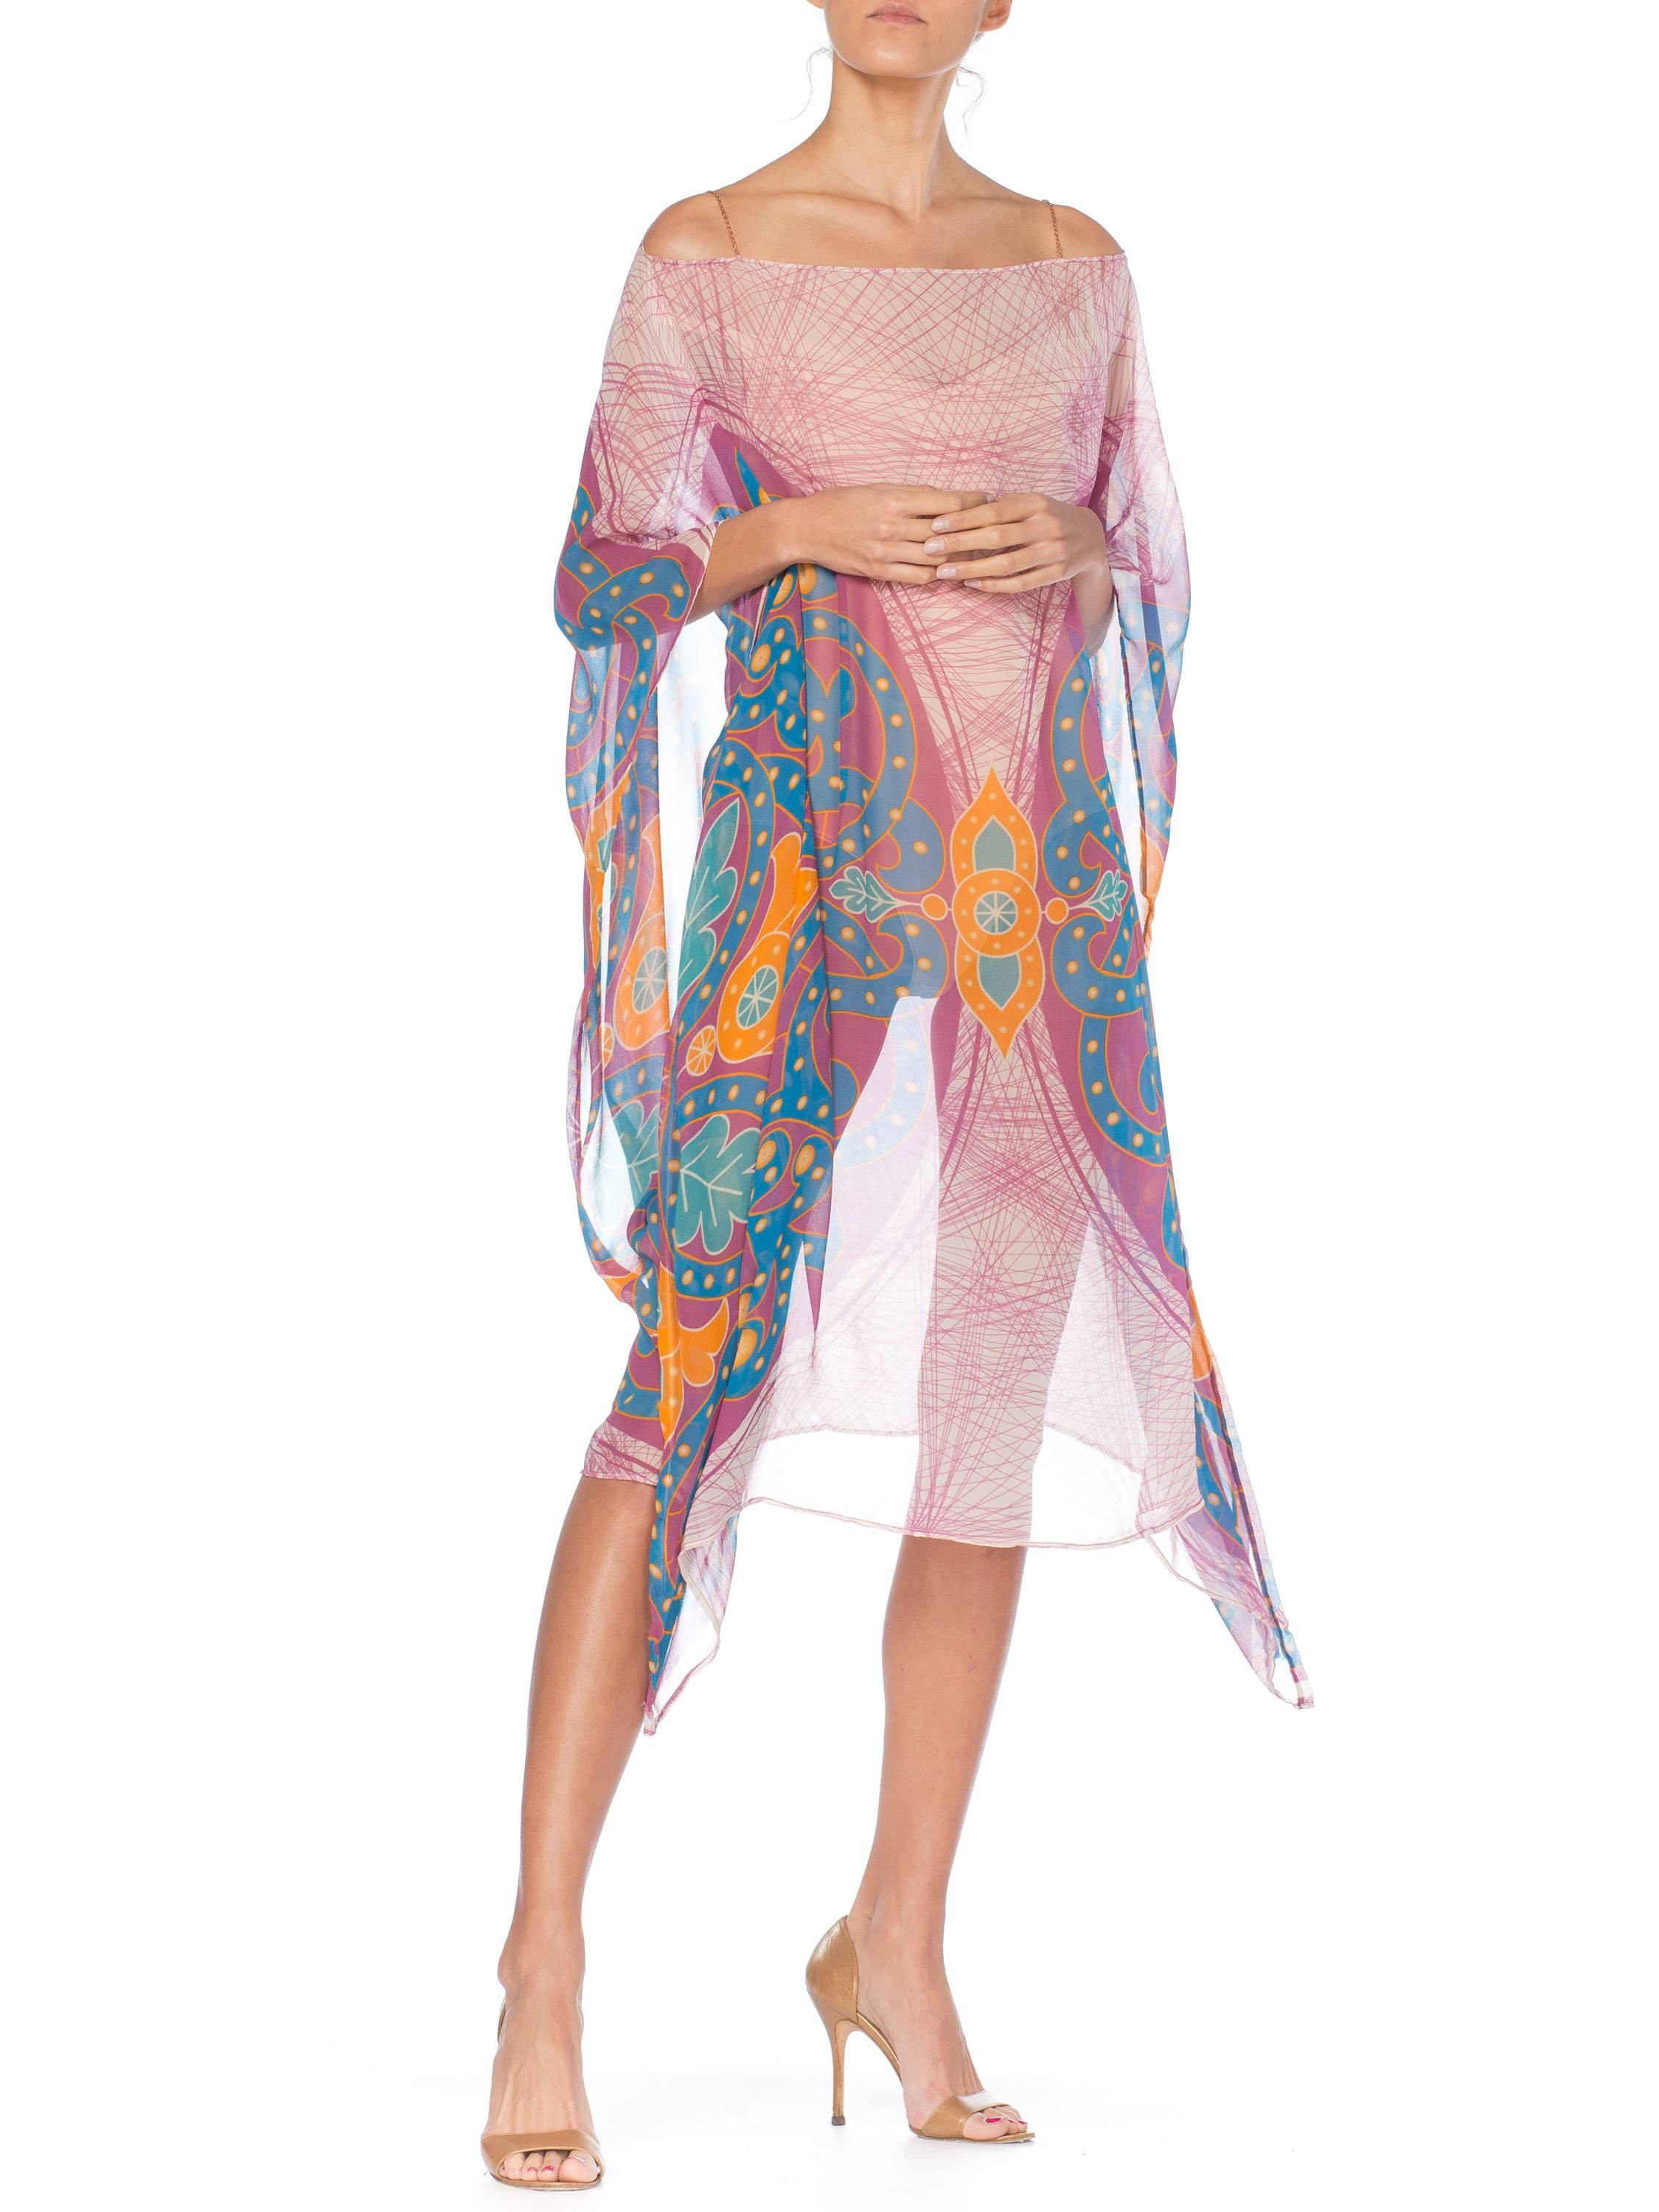 MORPHEW COLLECTION Pink  & Orange Silk Chiffon Butterfly Print Kaftan With Scarf Belt
MORPHEW COLLECTION is made entirely by hand in our NYC Ateliér of rare antique materials sourced from around the globe. Our sustainable vintage materials represent